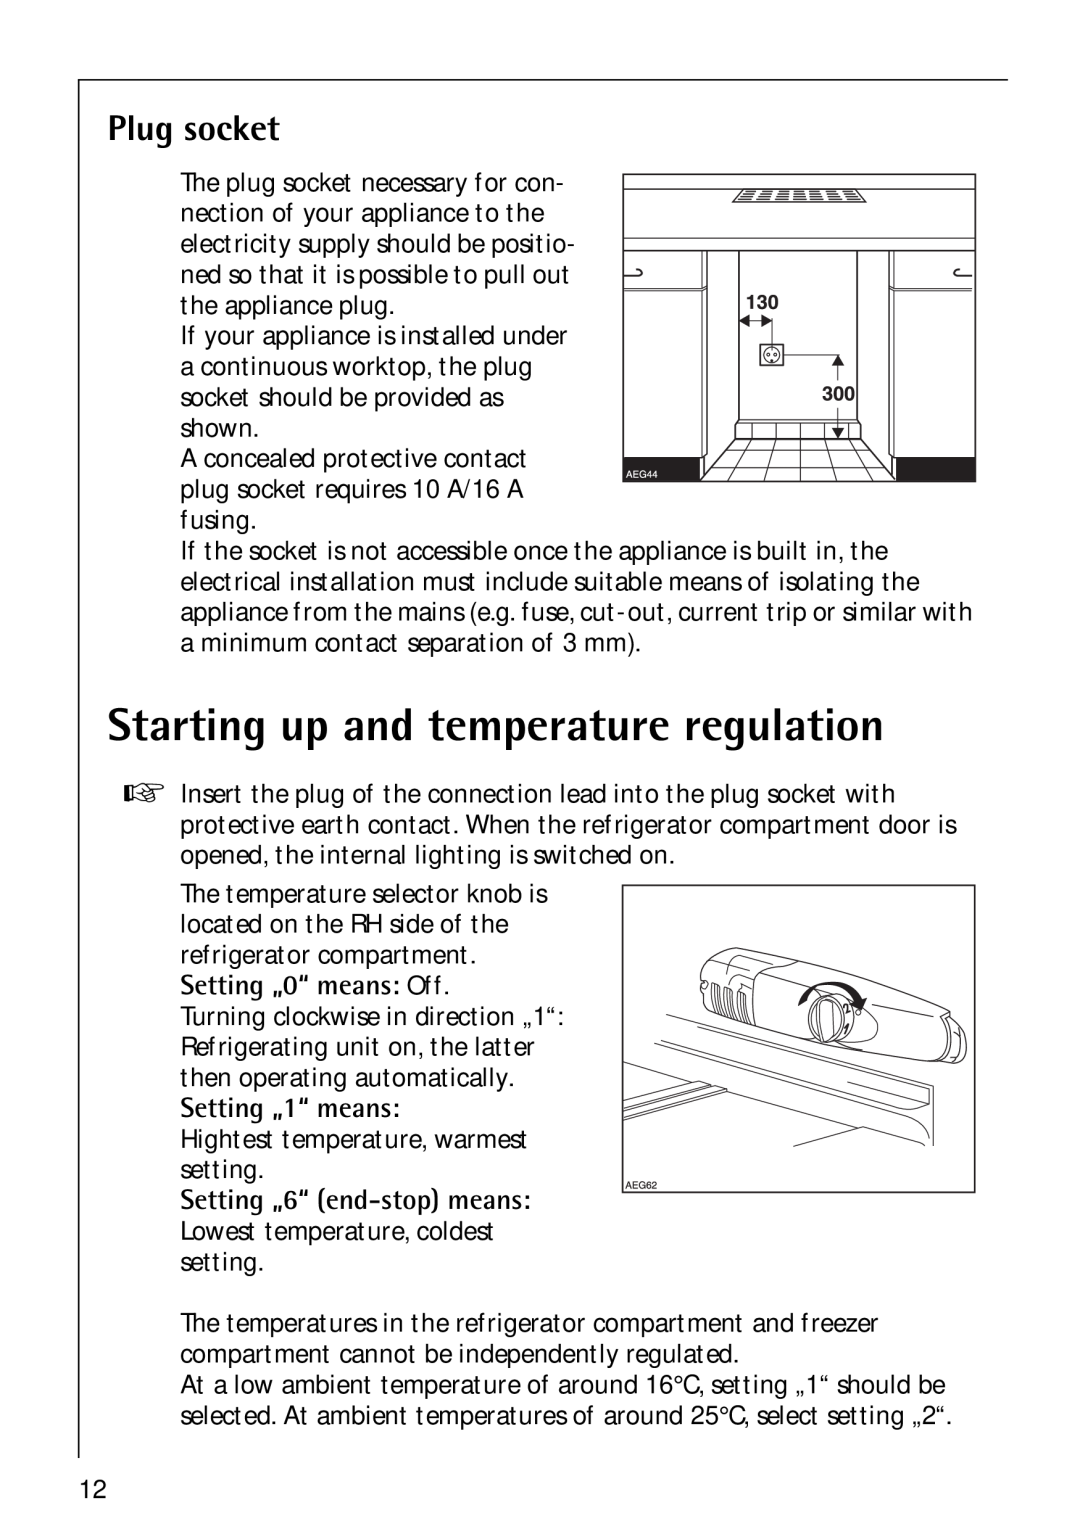 Electrolux Santo 1573TK-4 Starting up and temperature regulation, Plug socket, Setting „0“ means Off, Setting „1“ means 